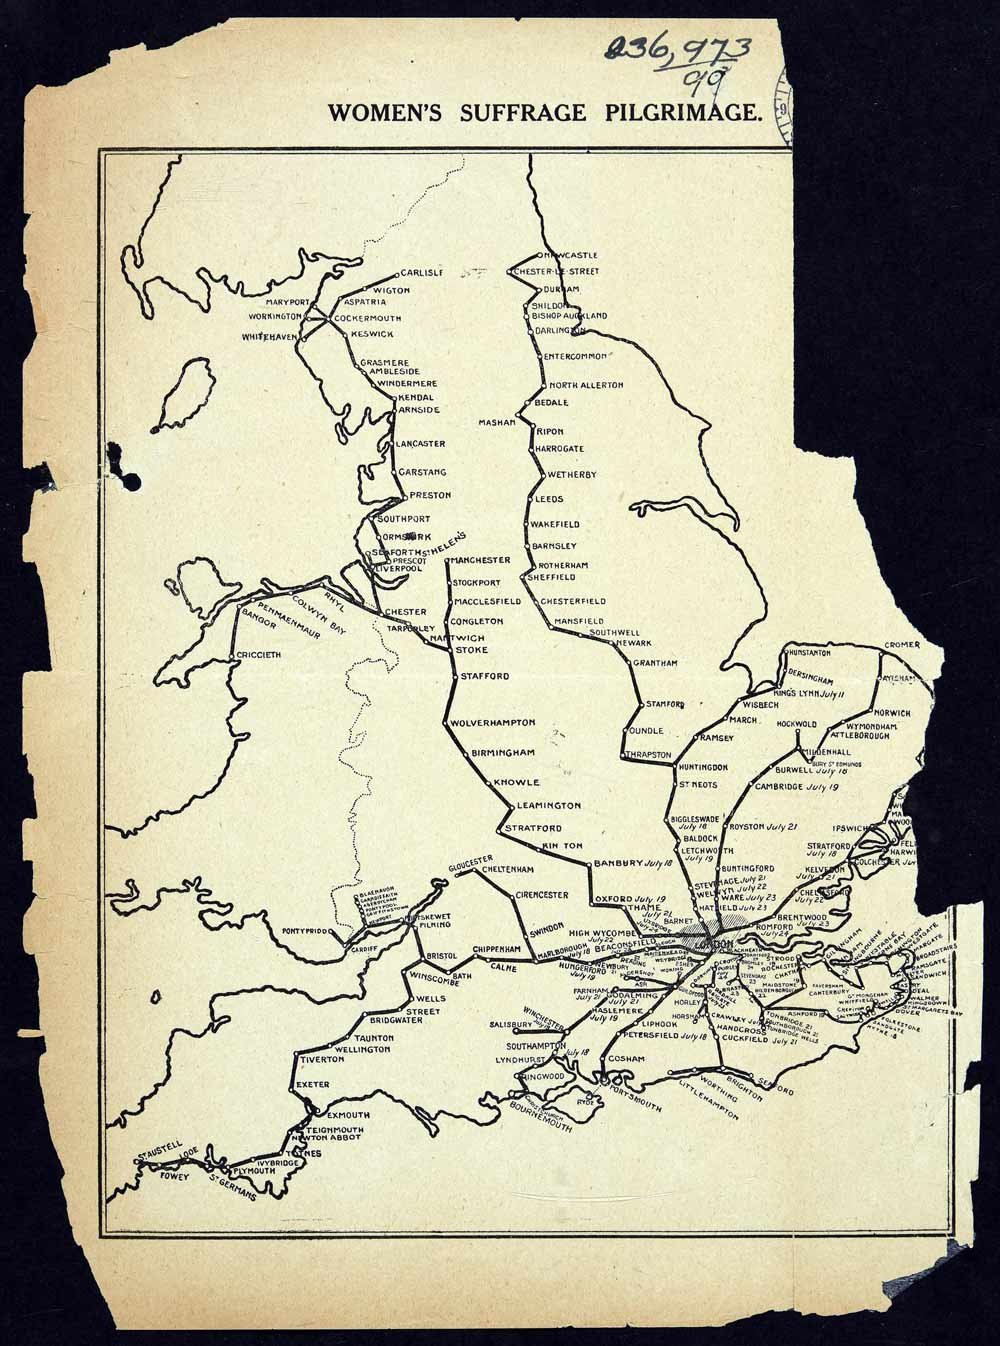 Map of England and Wales almost like a rail network plan showing stops on routes leading to London.